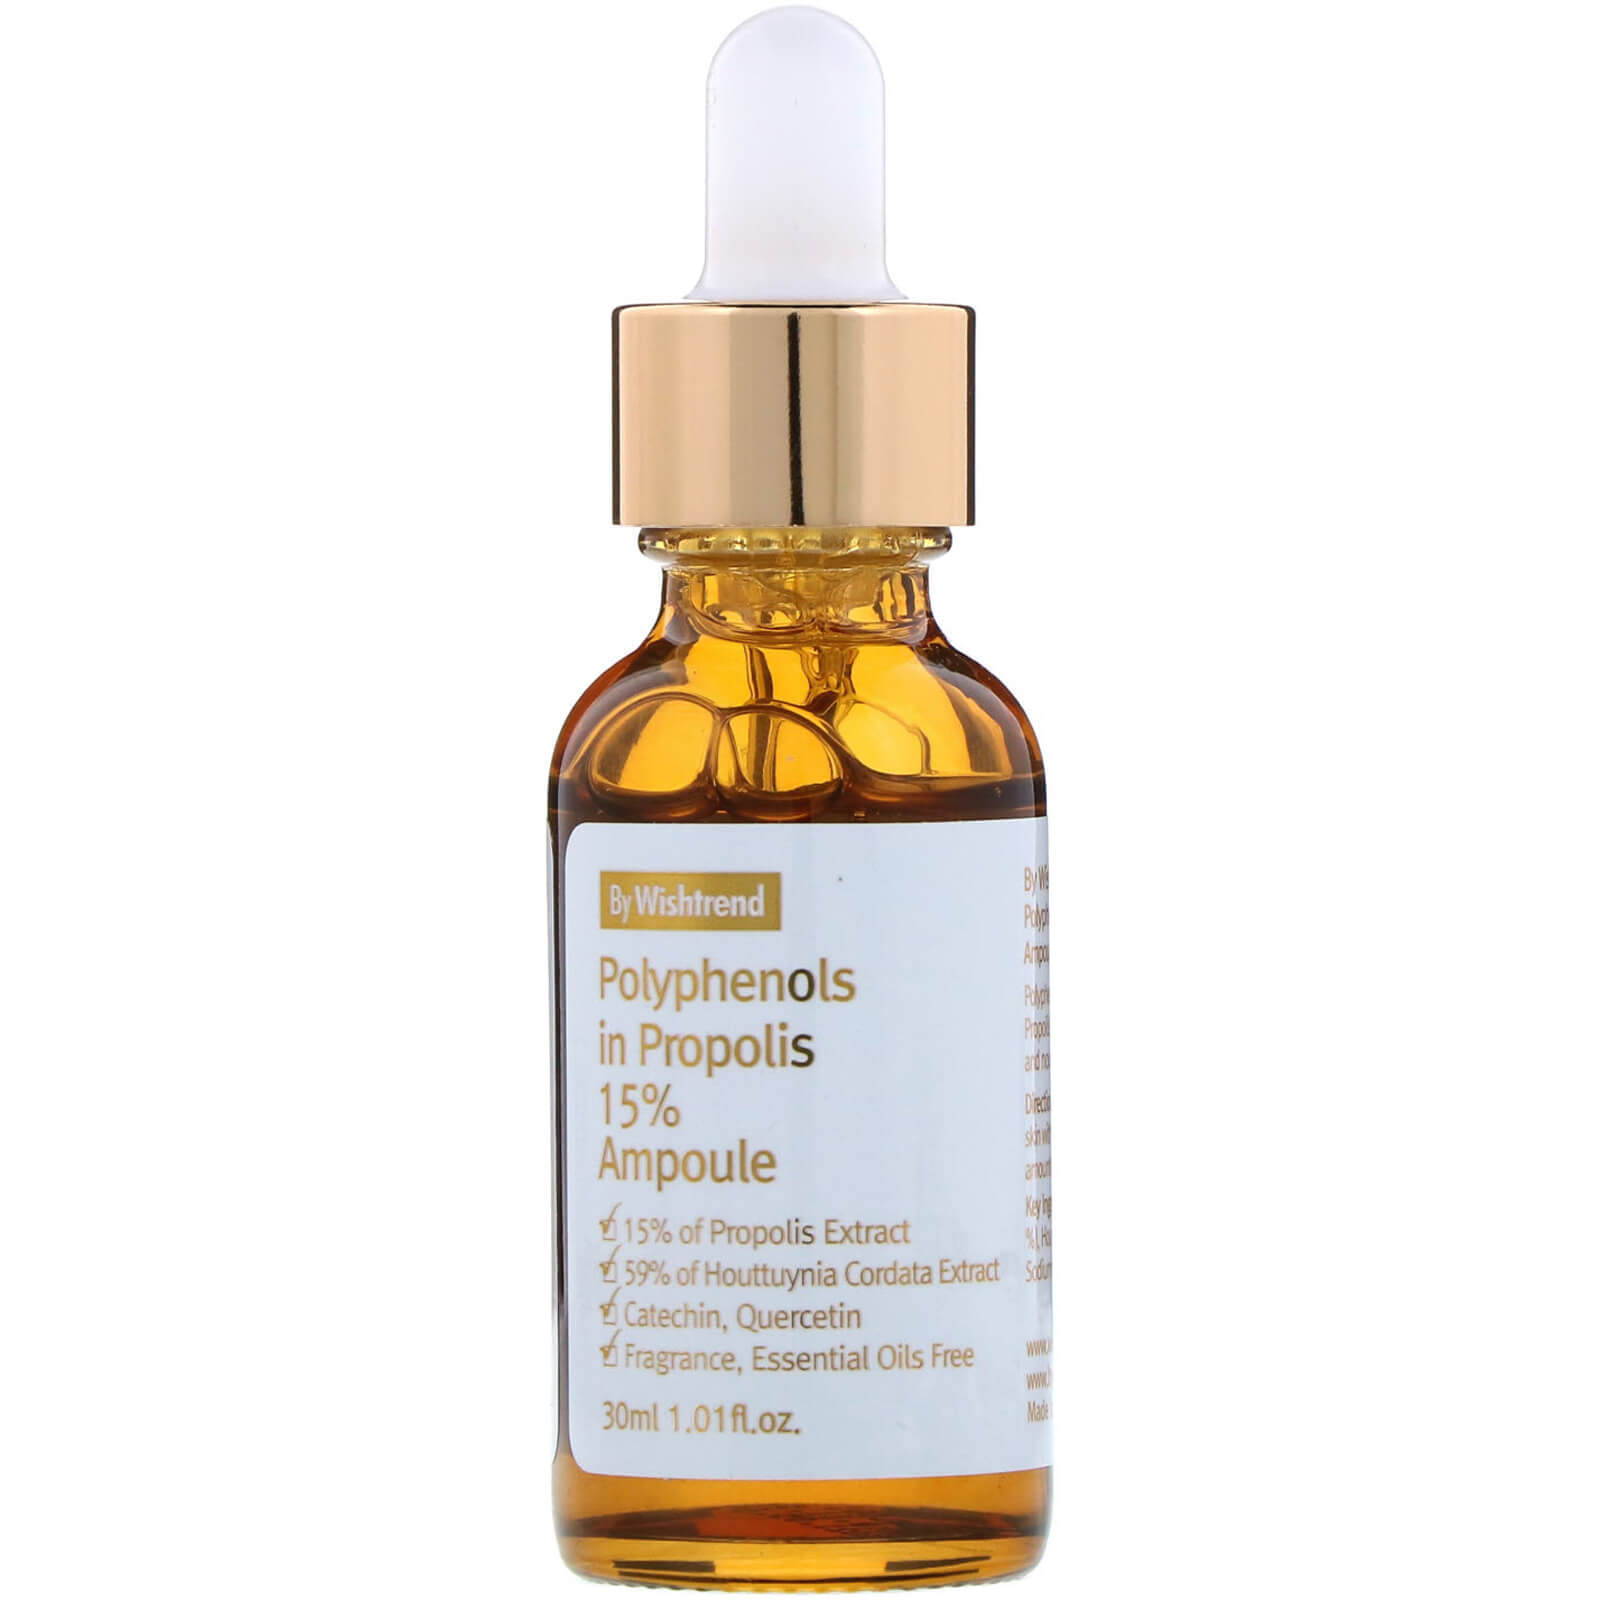 Сыворотка By Wishtrend Polyphenols in Propolis 15% Ampoule 30 мл